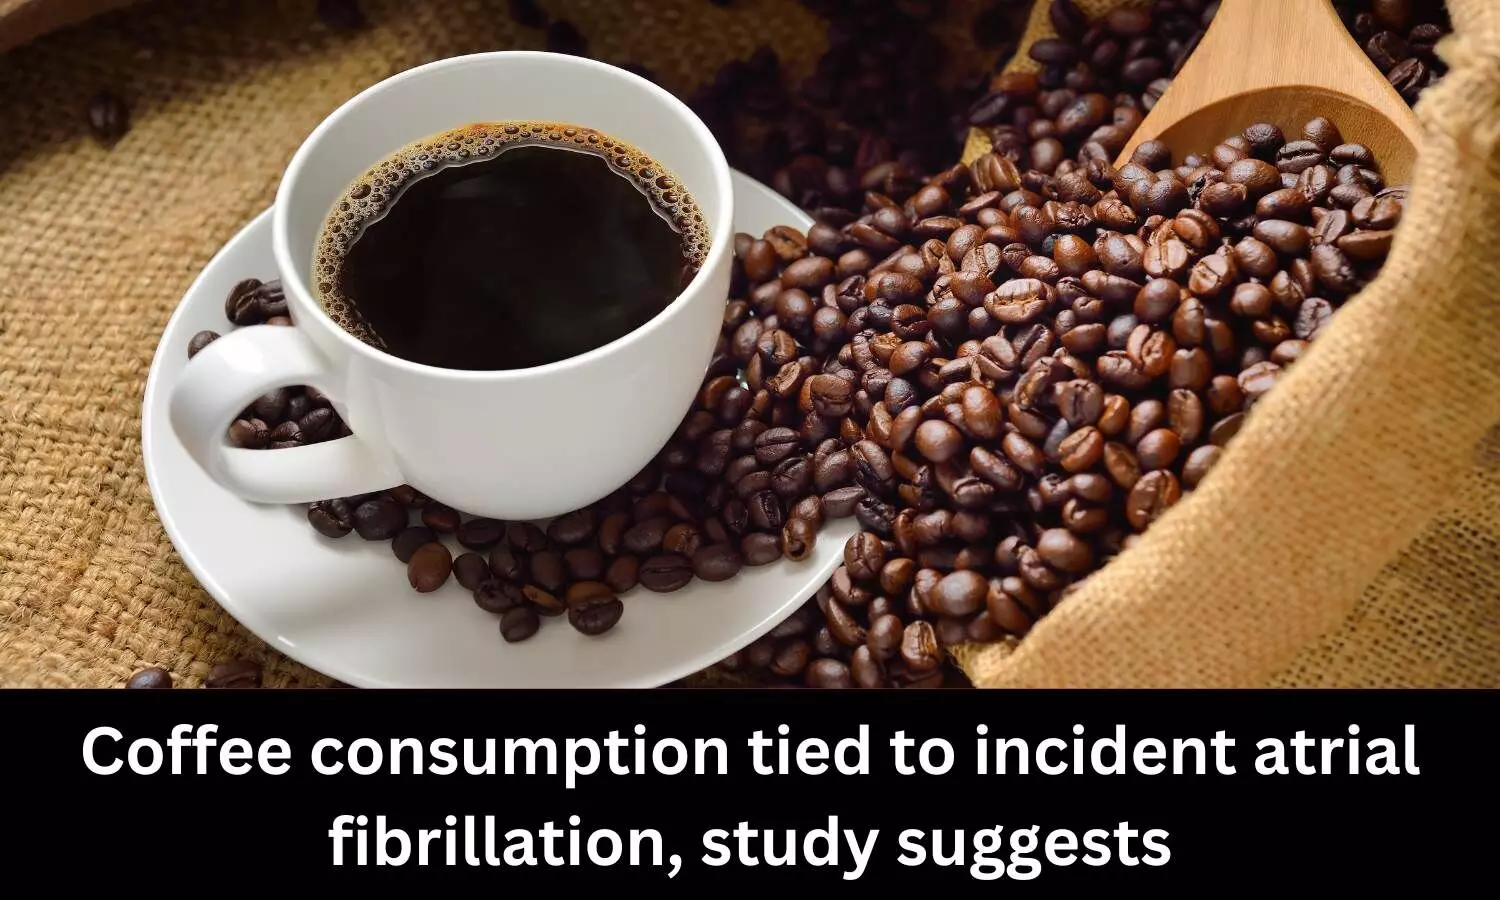 Coffee consumption tied to incident atrial fibrillation: Study